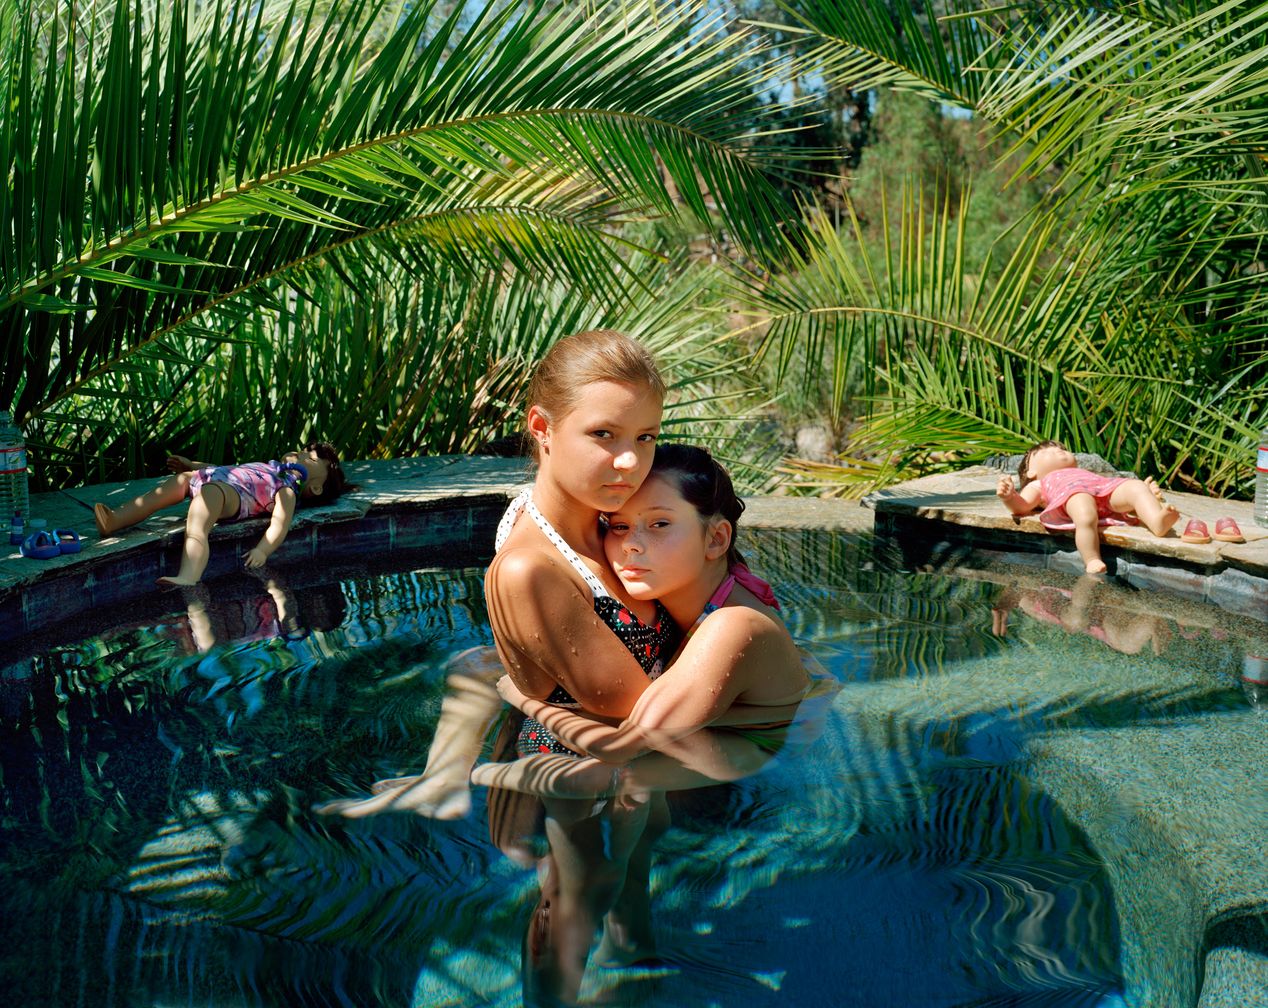 Two sisters hugging in a small pool, environmental portrait photography, Ilona Szwarc, contemporary Los Angeles artist.